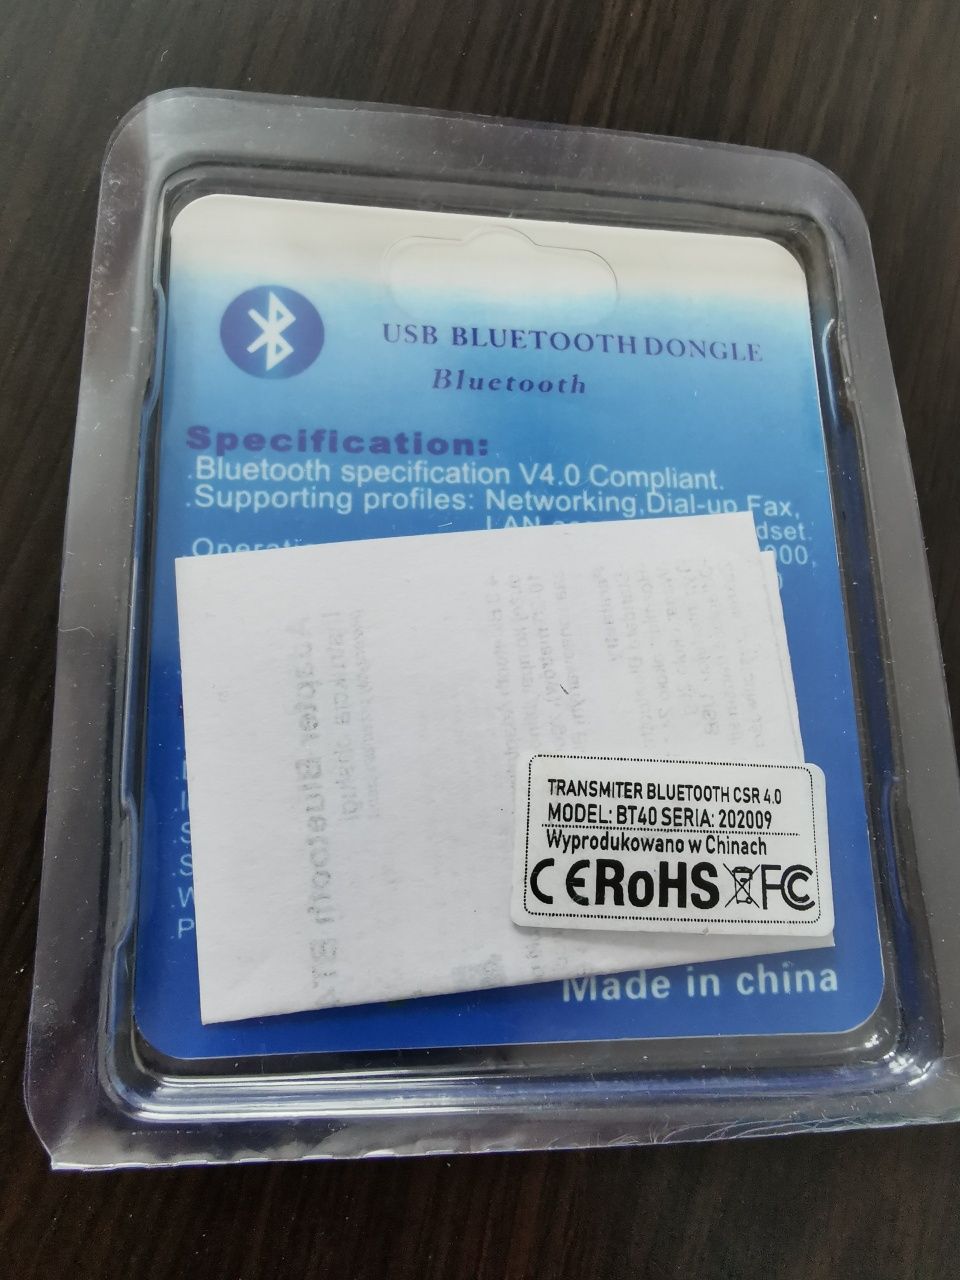 Nowy adapter Bluetooth CSR 4.0 Dongle